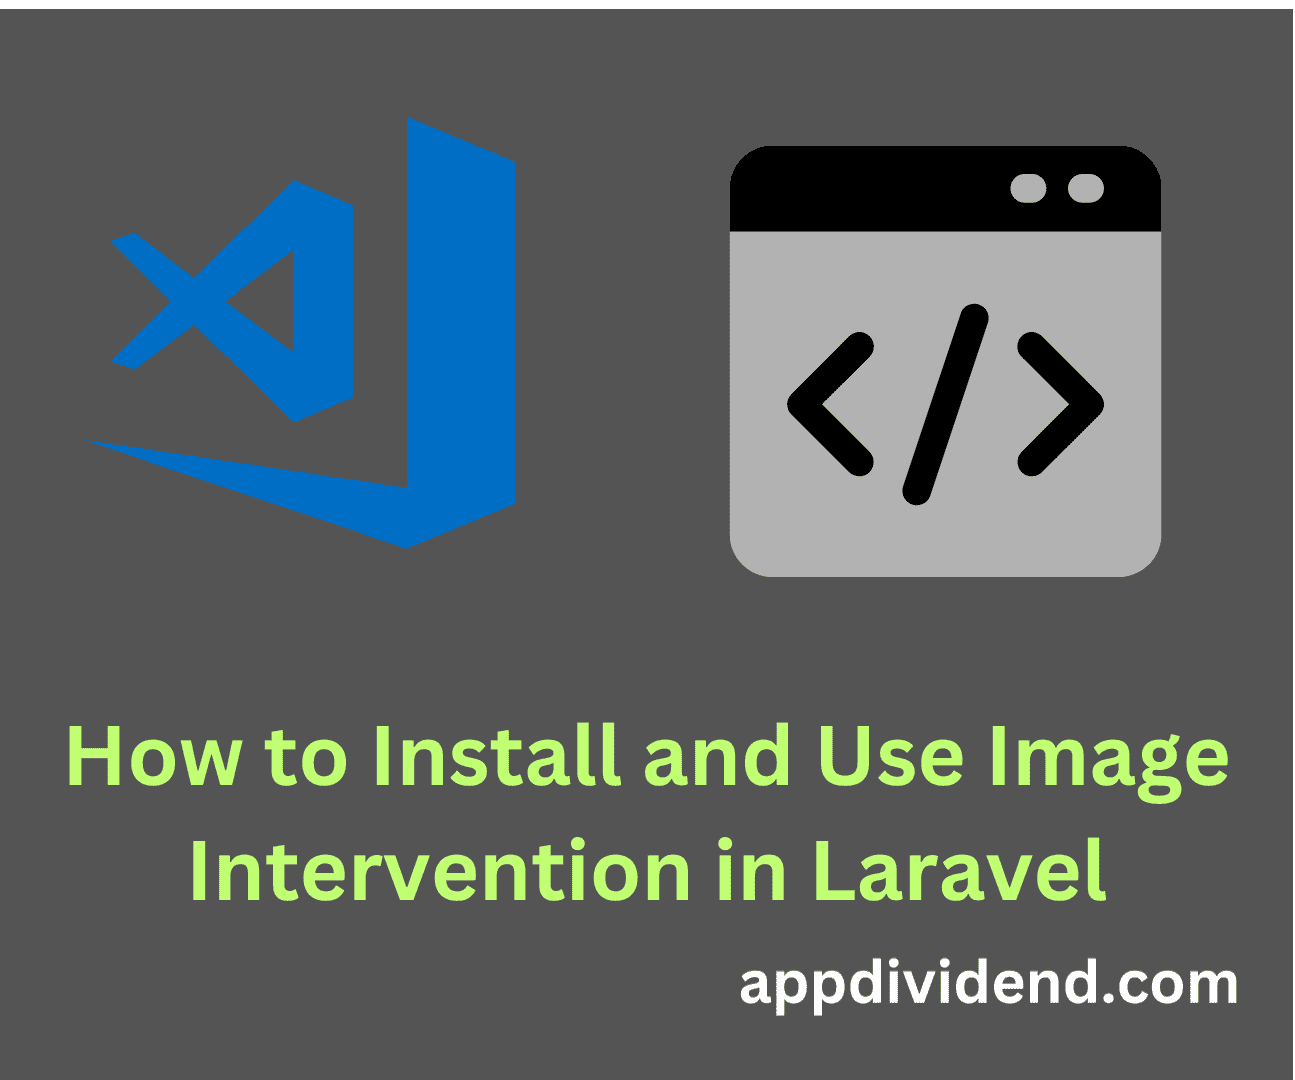 How to Install and Use Image Intervention in Laravel